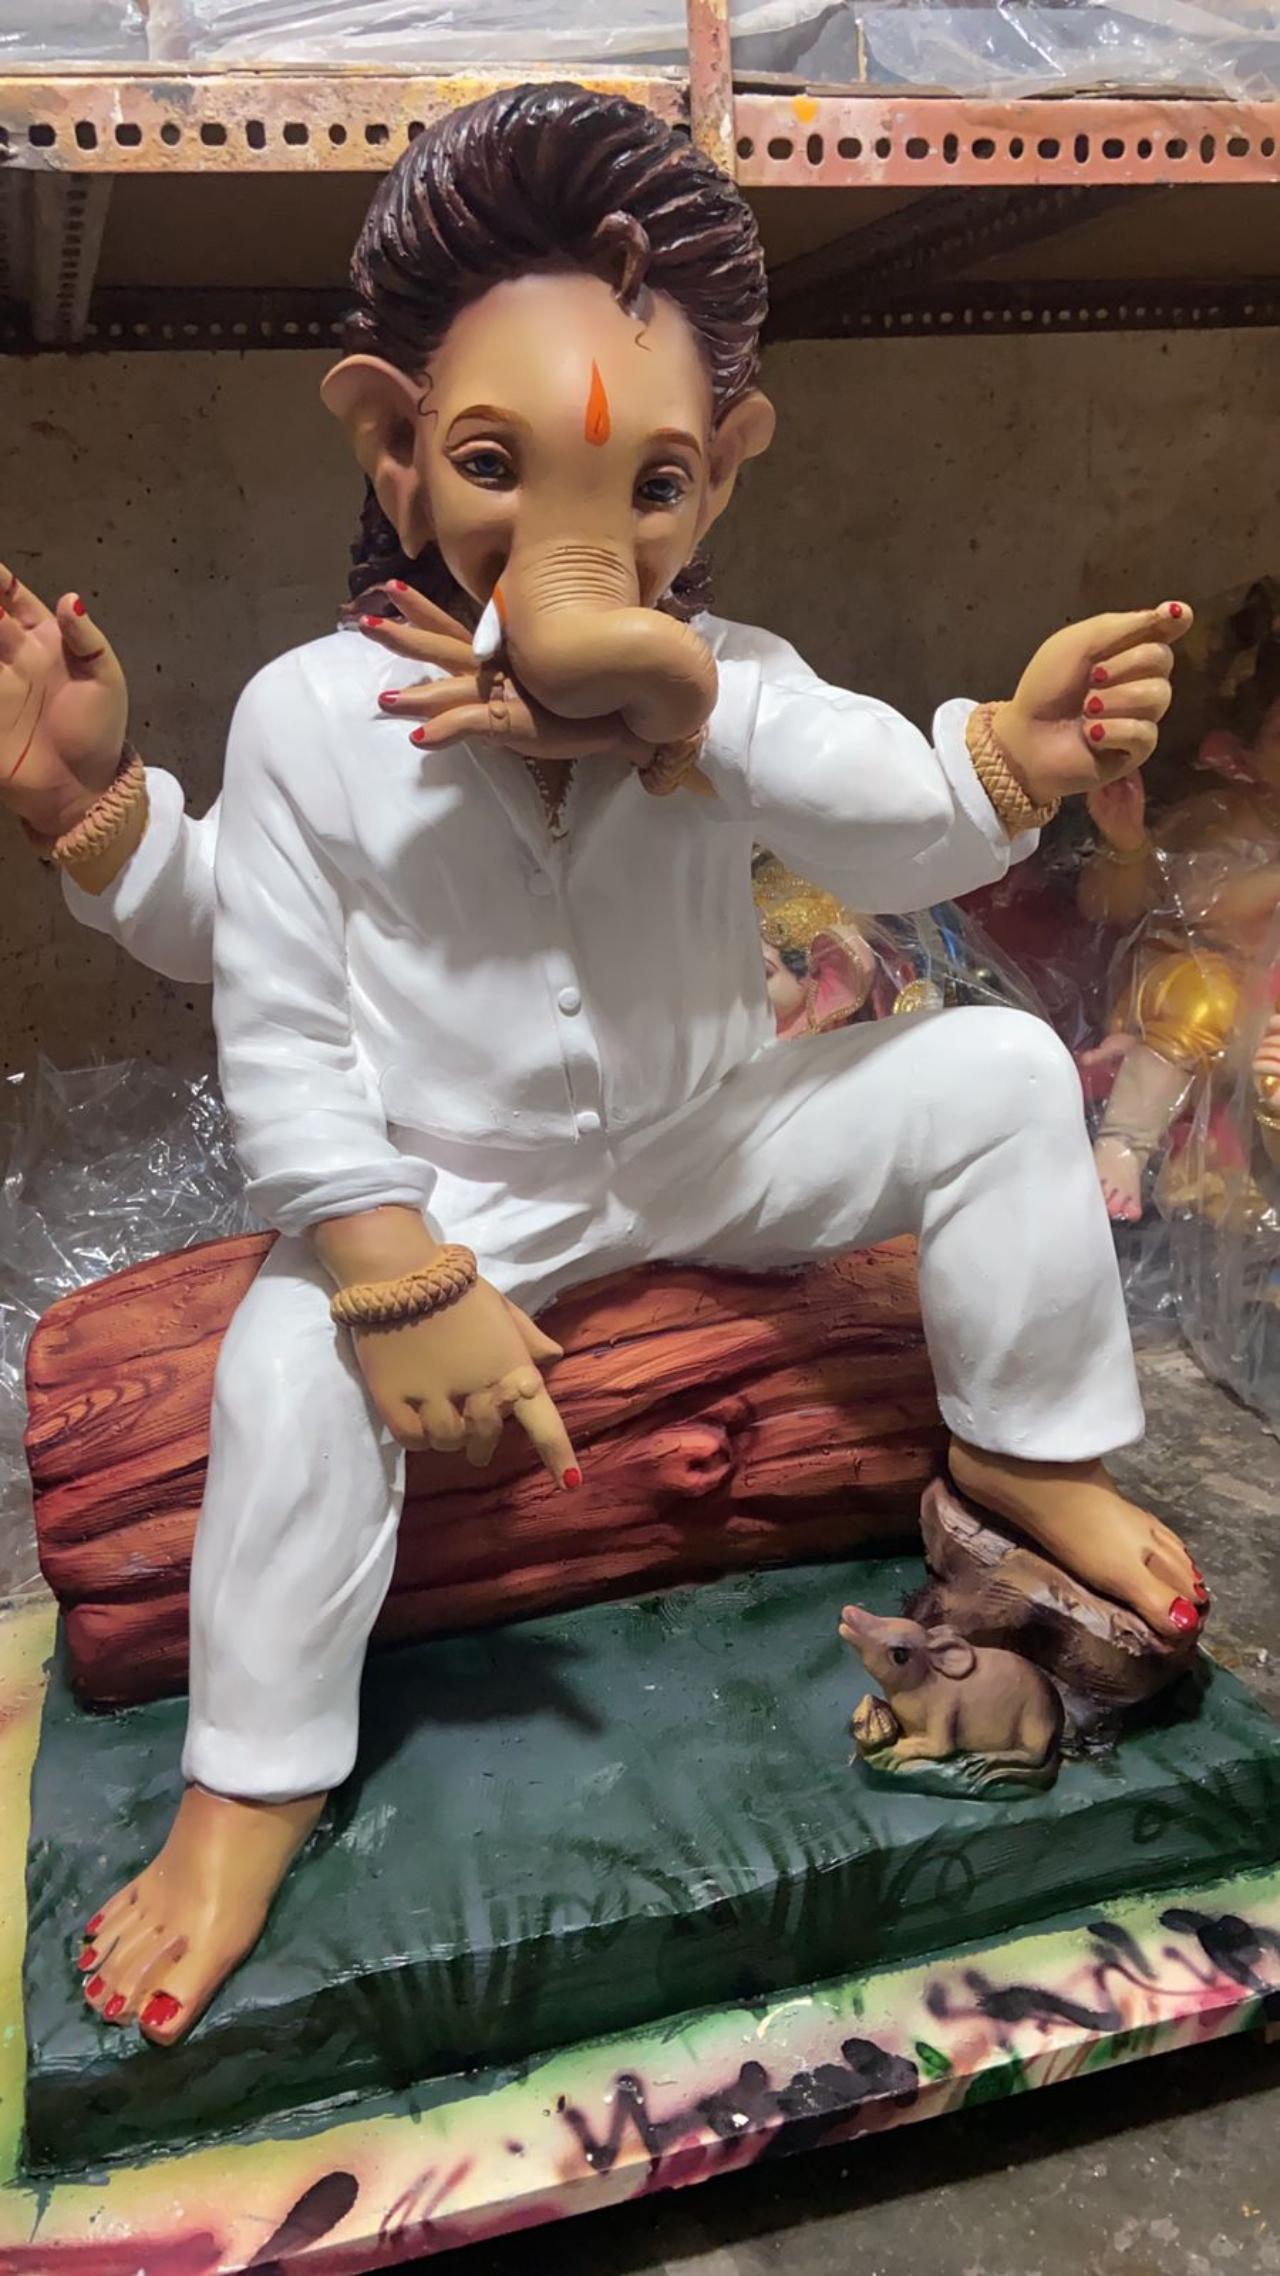 Allu Arjun's look from 'Pushpa: The Rise' has inspired Lord Ganesha statues. On Tuesday, several images and videos of a Ganpati idol went viral, where the deity can be seen sitting in a white kurta-pyjama, which were similar to what had Arjun worn in the film. The statue also had Pushpa's signature hand gesture from the film